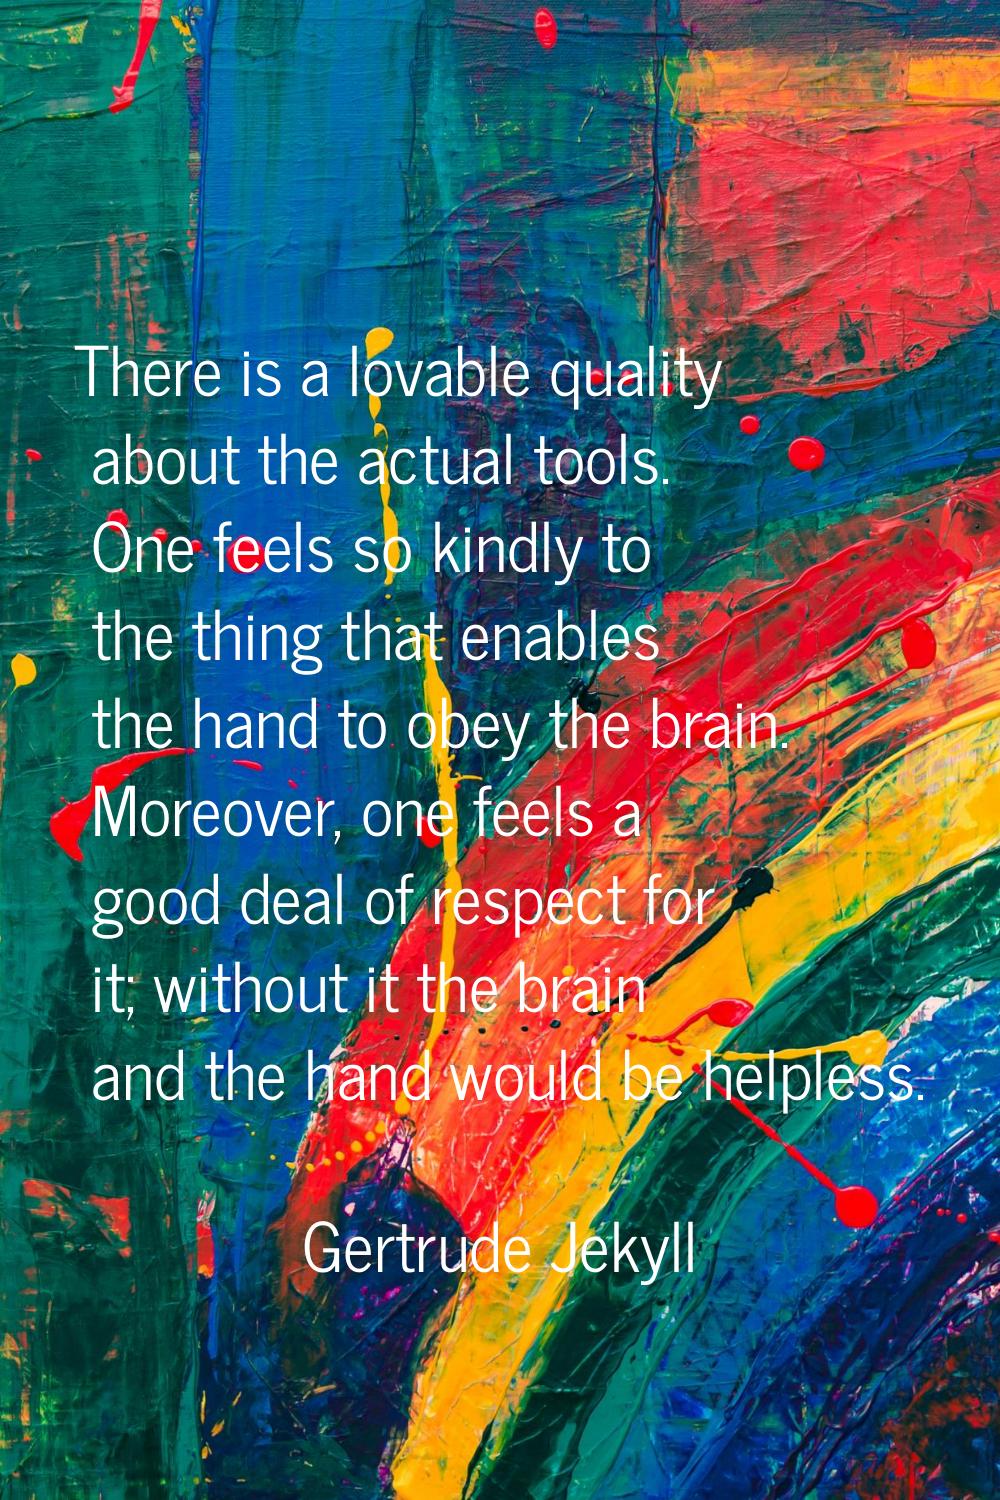 There is a lovable quality about the actual tools. One feels so kindly to the thing that enables th